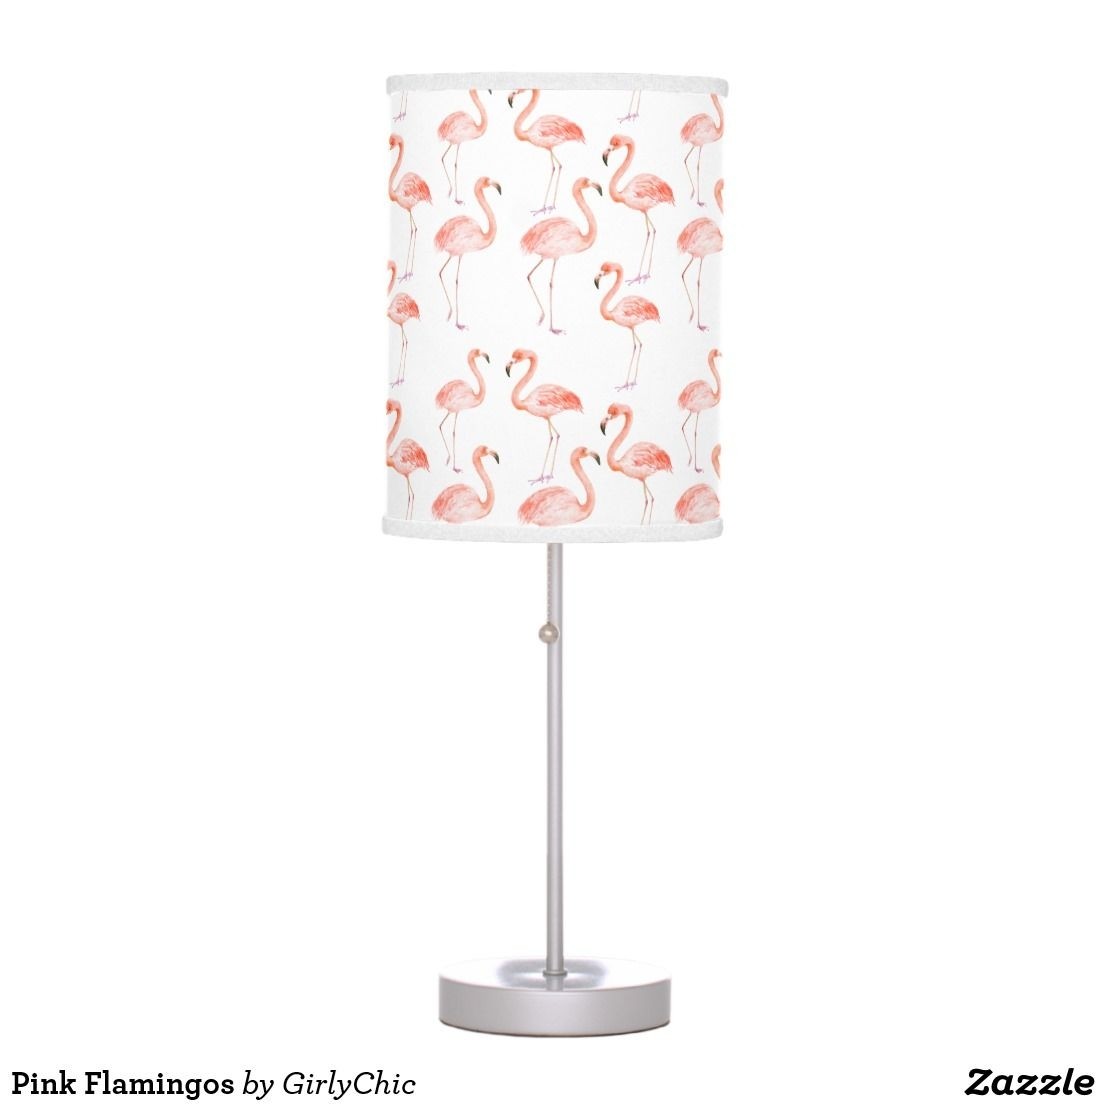 Pink flamingos table lamp with images